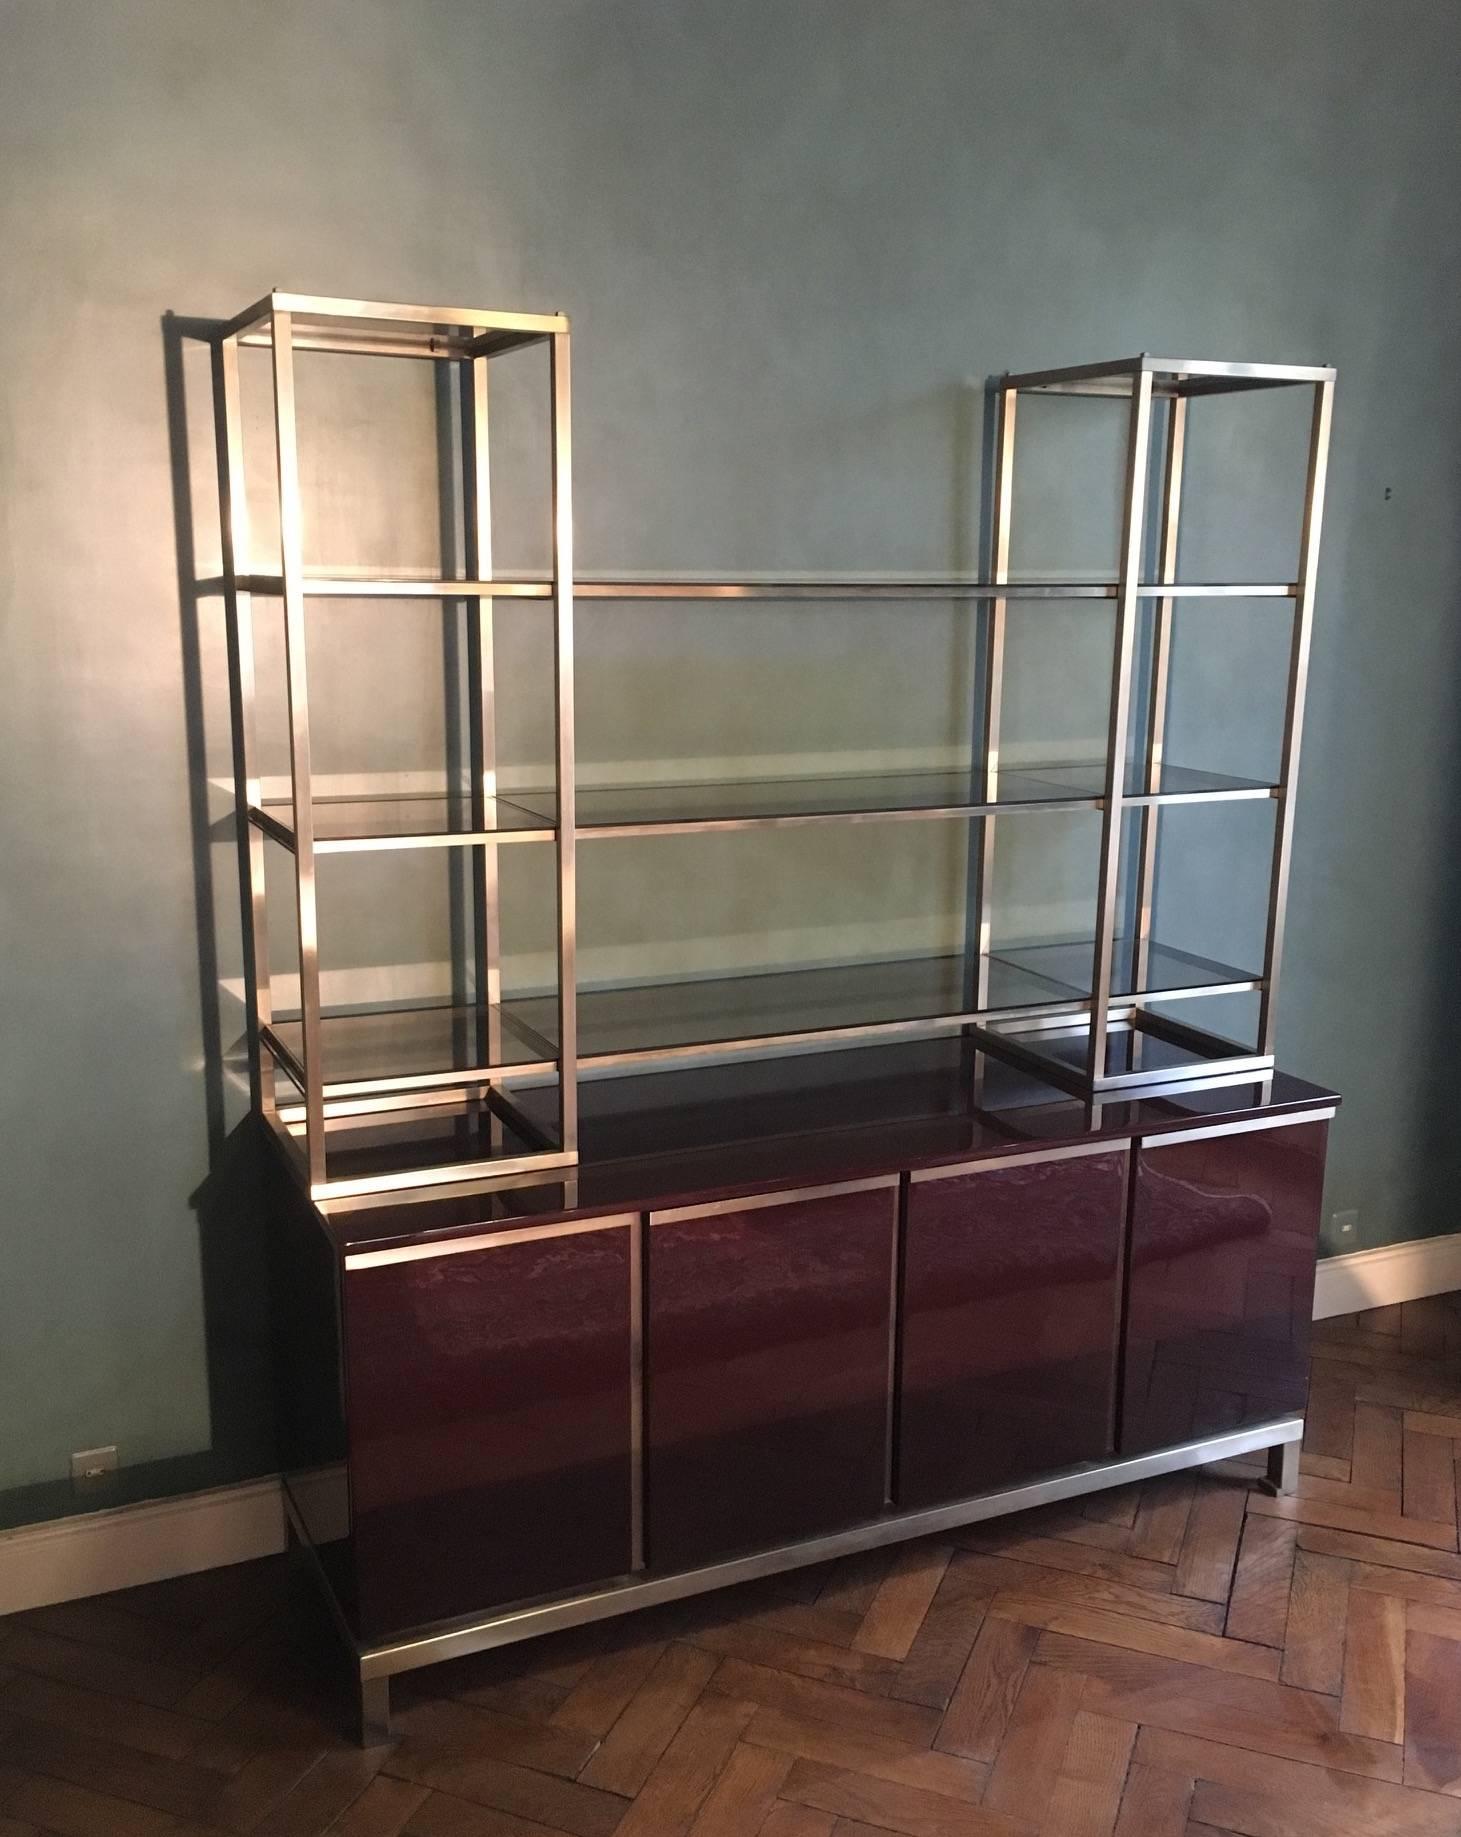 Very rare Guy Lefèvre book shelf made of lacquered wood and brushed steel. 

Also available and sold separately is a matching Guy Lefèvre desk made of leather and lacquered wood and accented with brushed steel, as well as a matching desk chair that